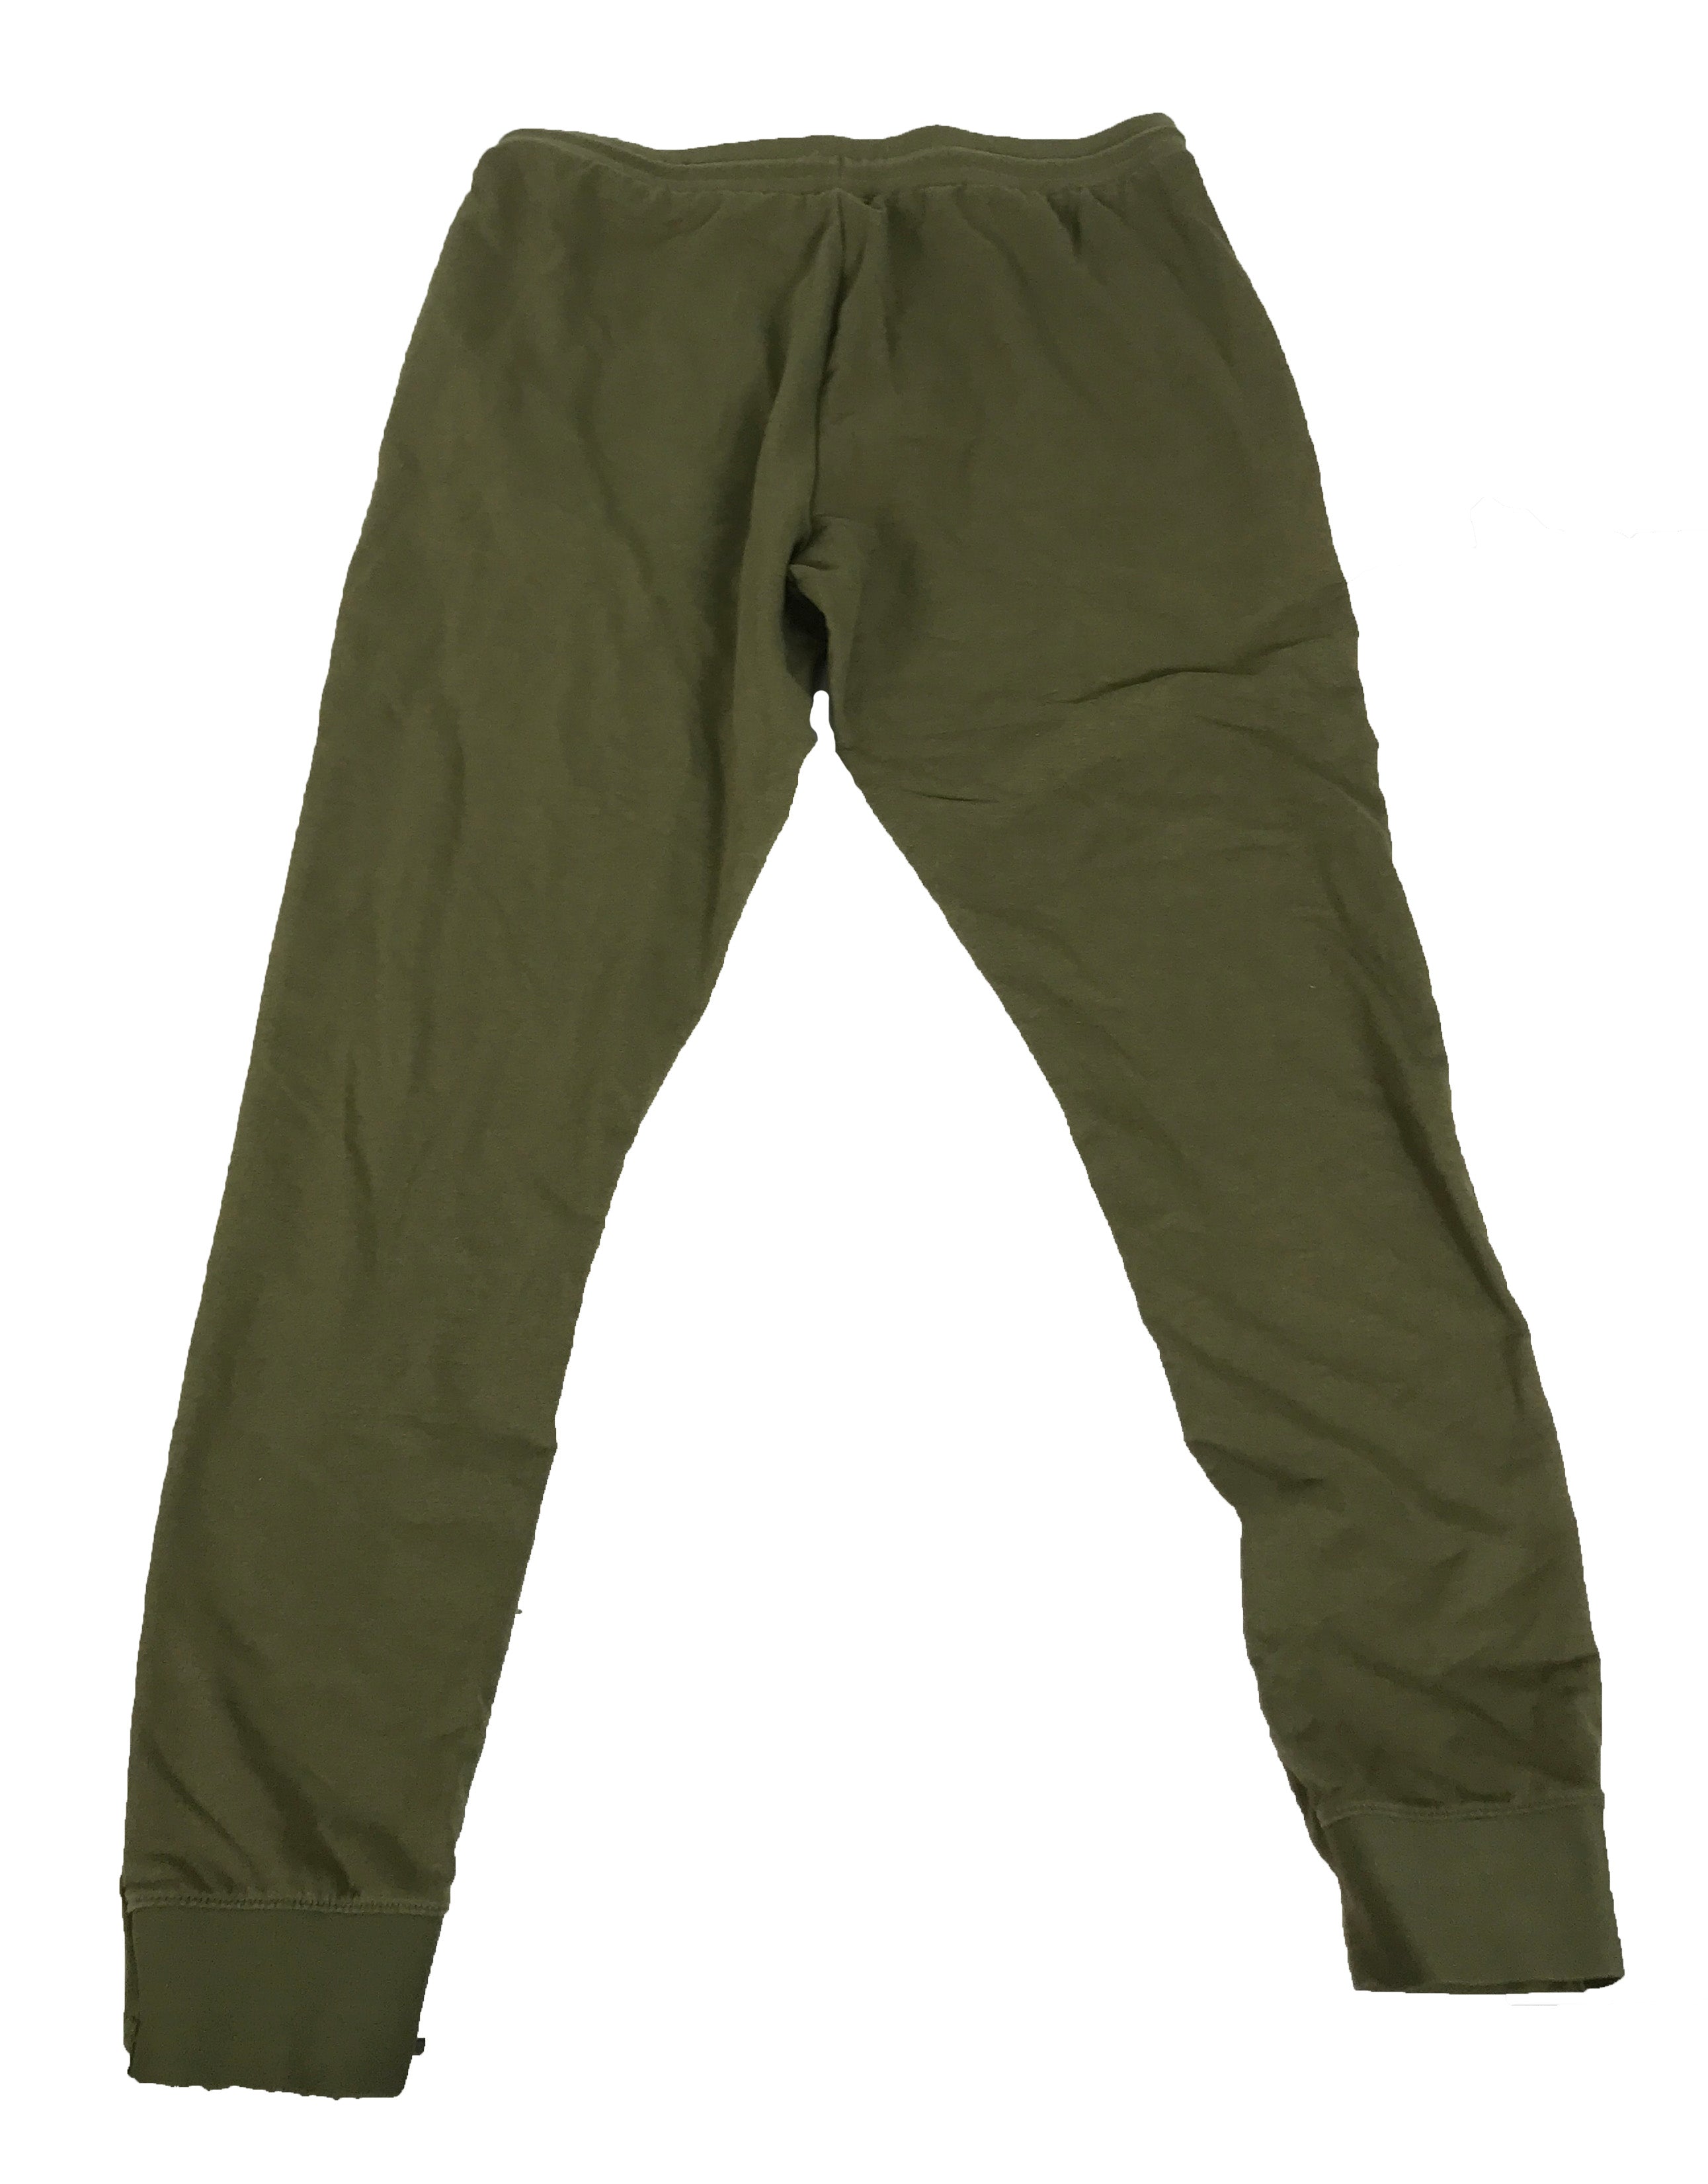 Gym Shark Olive Green Sweatpants Men's Size Small